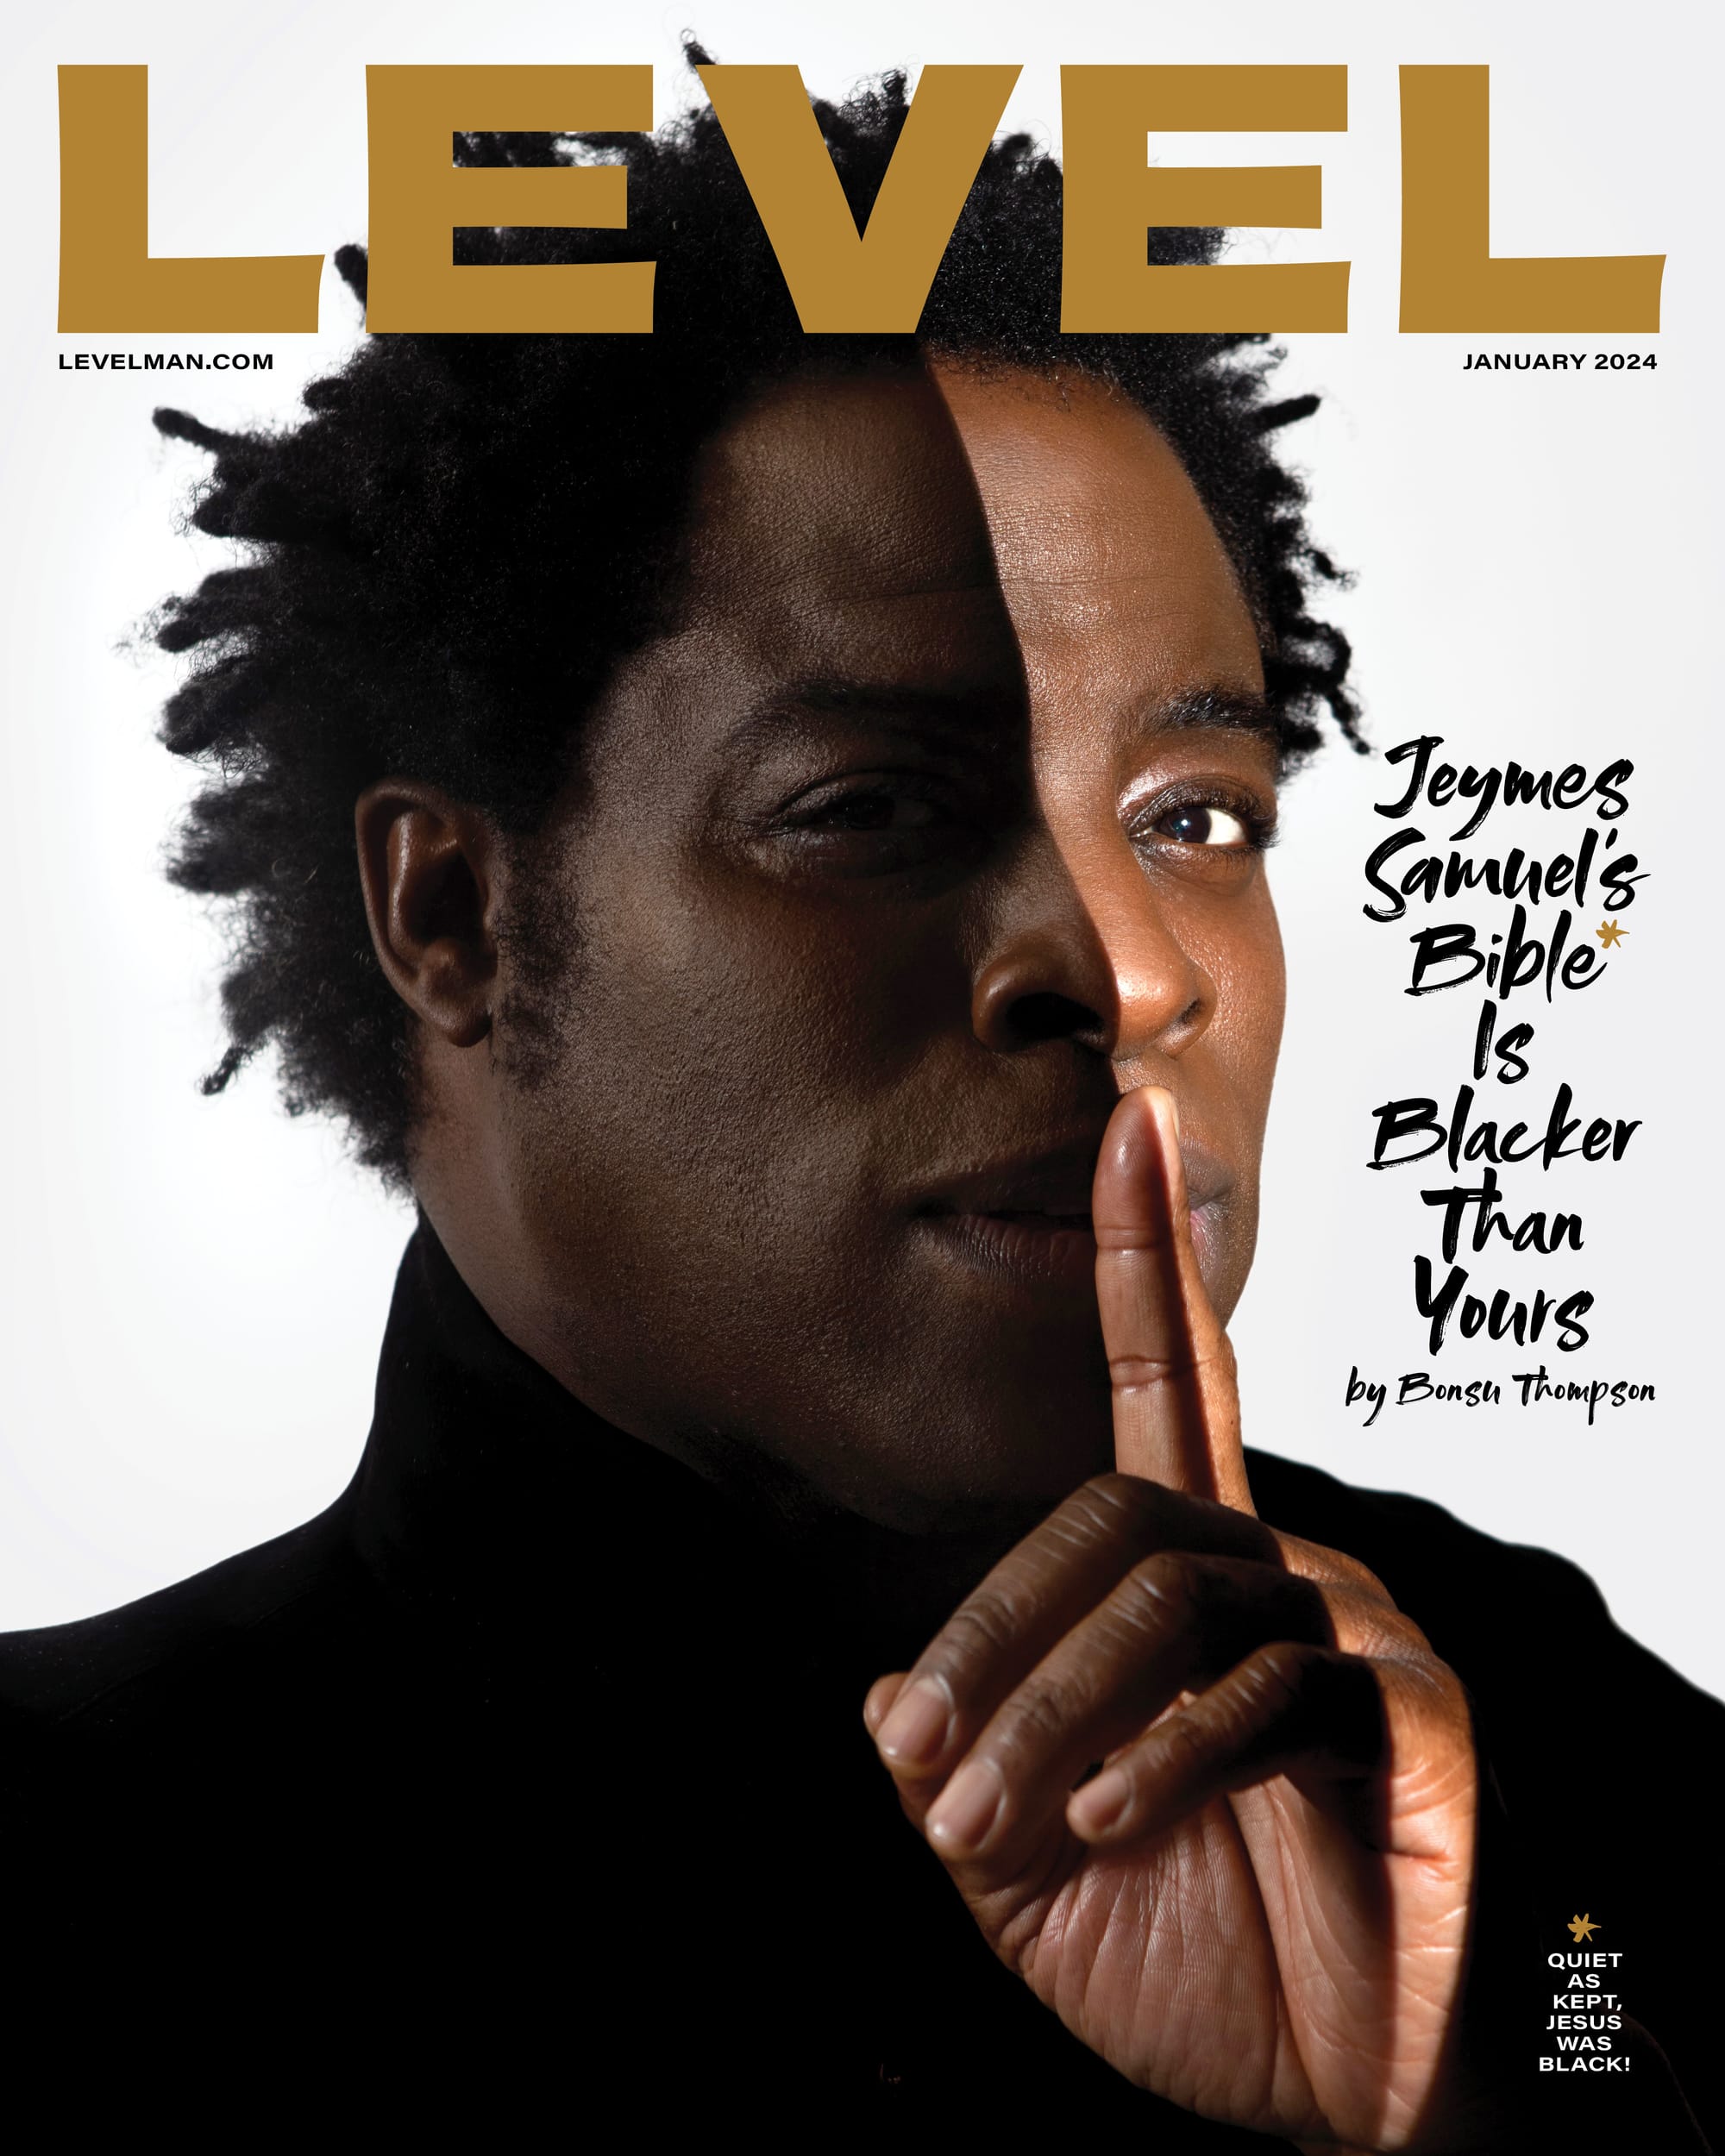 Photo of Jeymes Samuel on the January 2024 cover of LEVEL